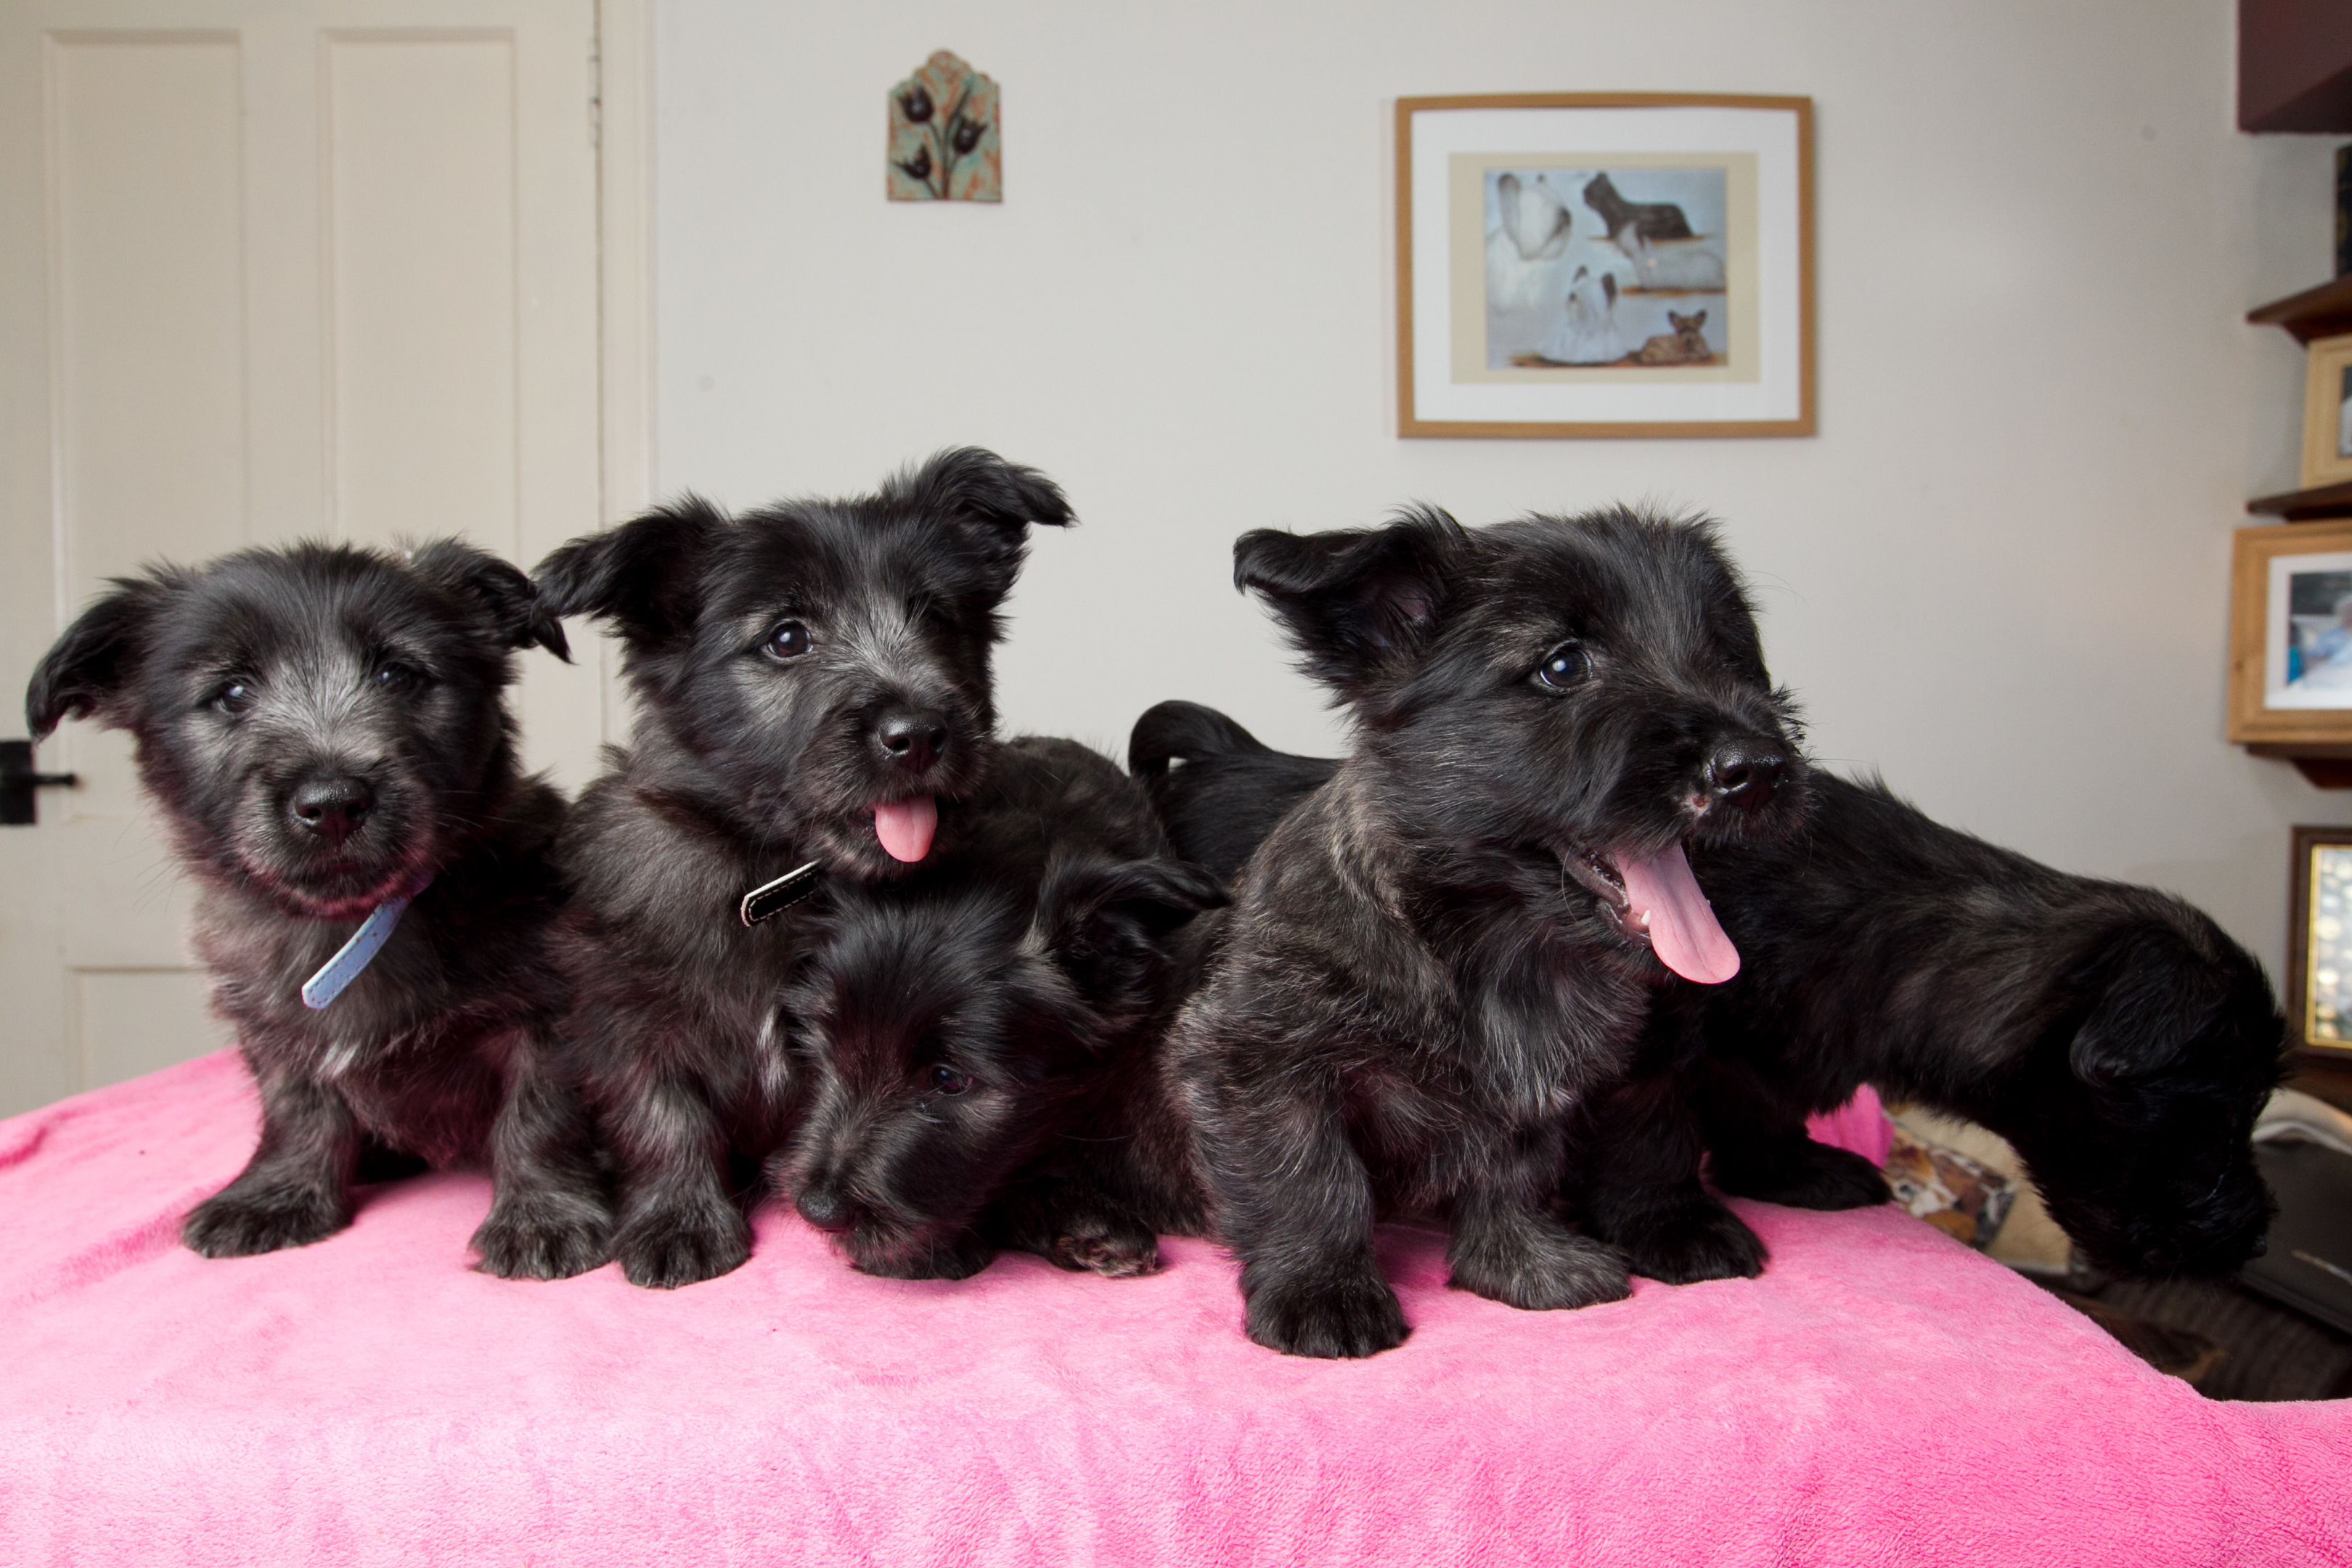 Skye Terrier puppies (Andrew Cawley / DC Thomson)